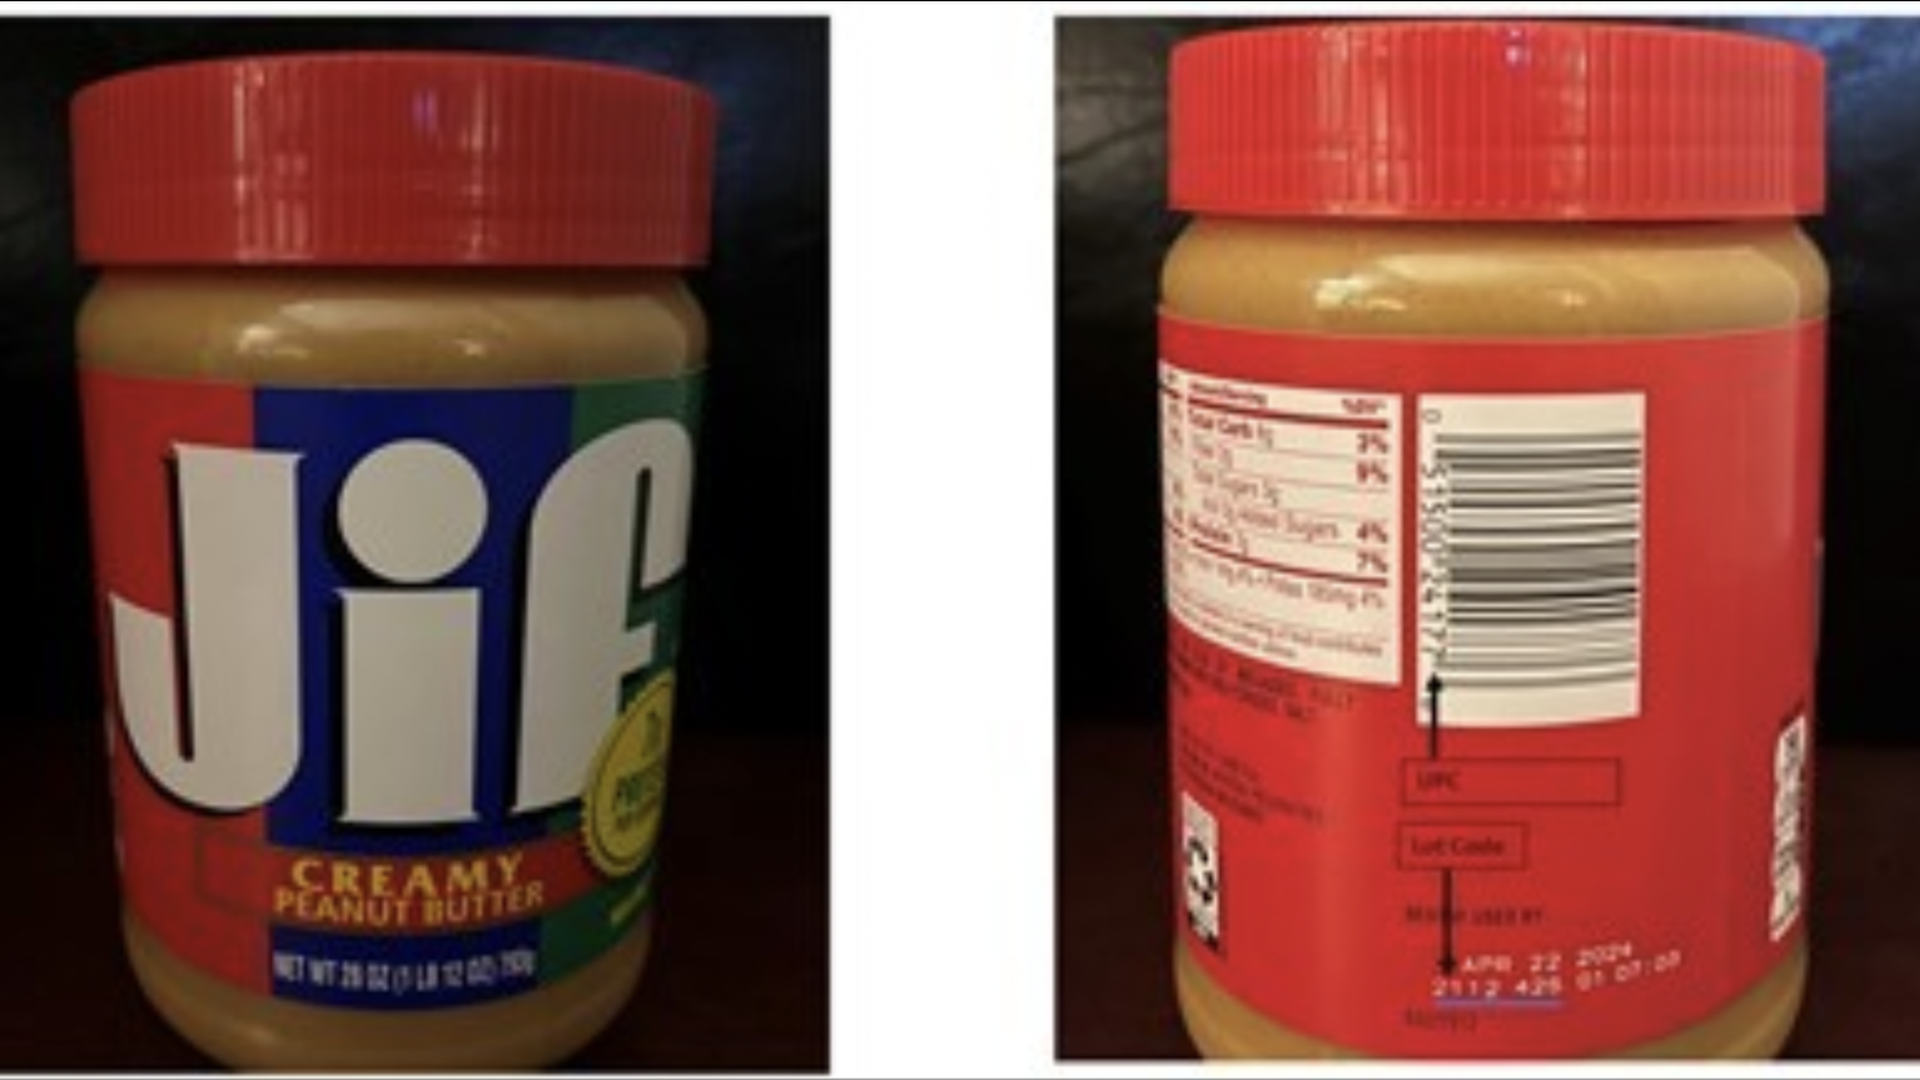 Jif peanut butter container